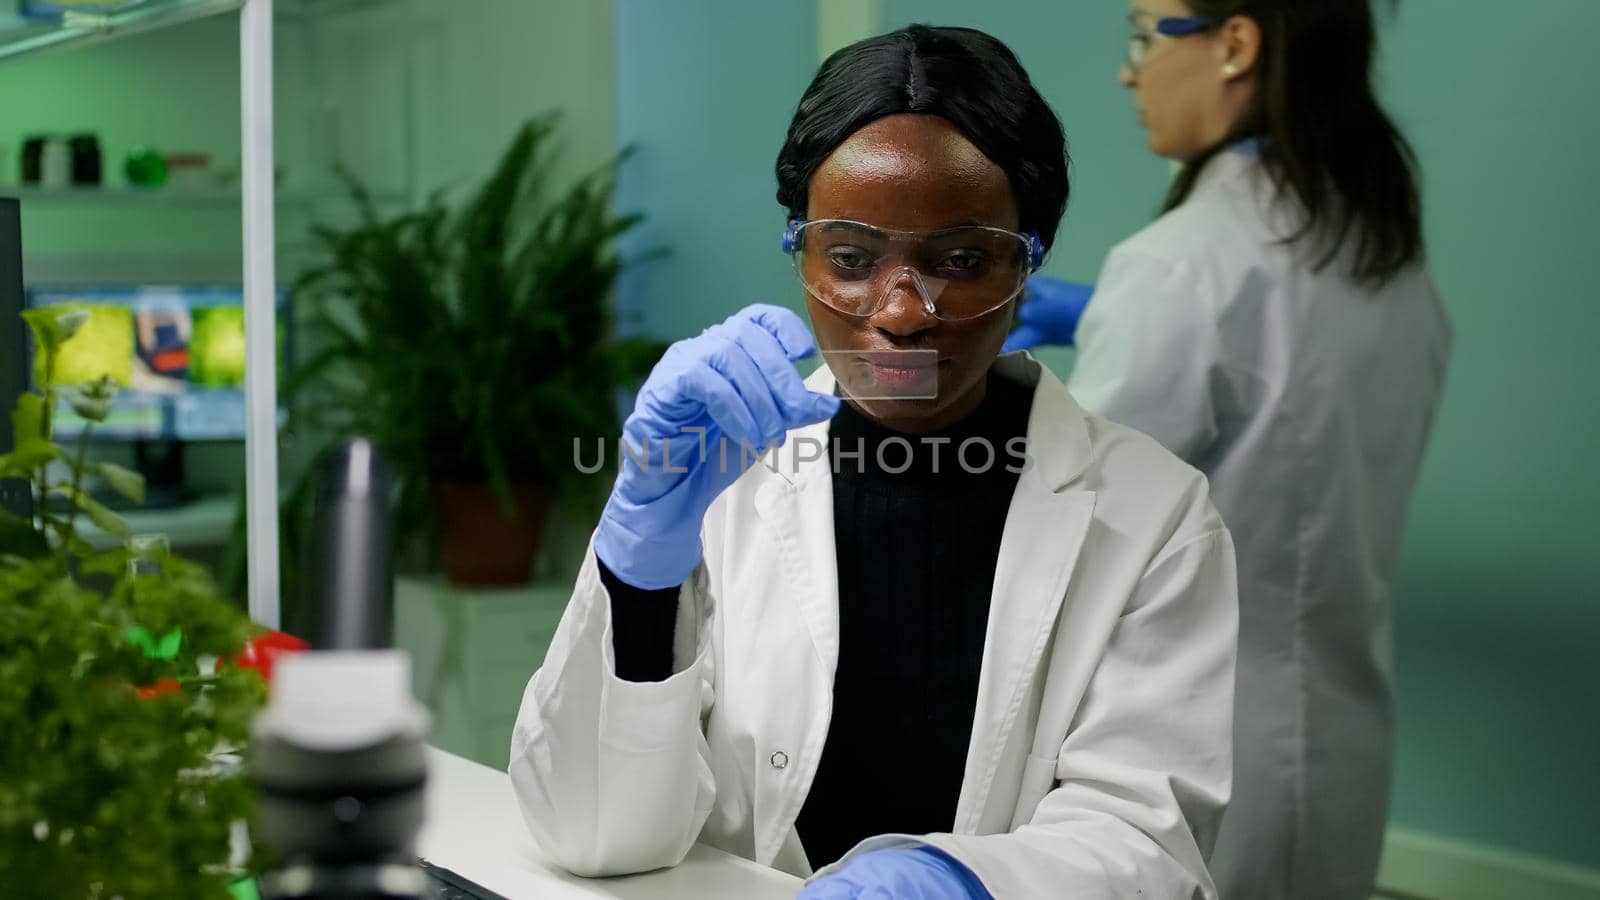 Botanist researcher scientist analyzing green liquid sample under microscope for microbiology experiment. Chemist specialist discovering organic gmo plants while working in pharmaceutical laboratory